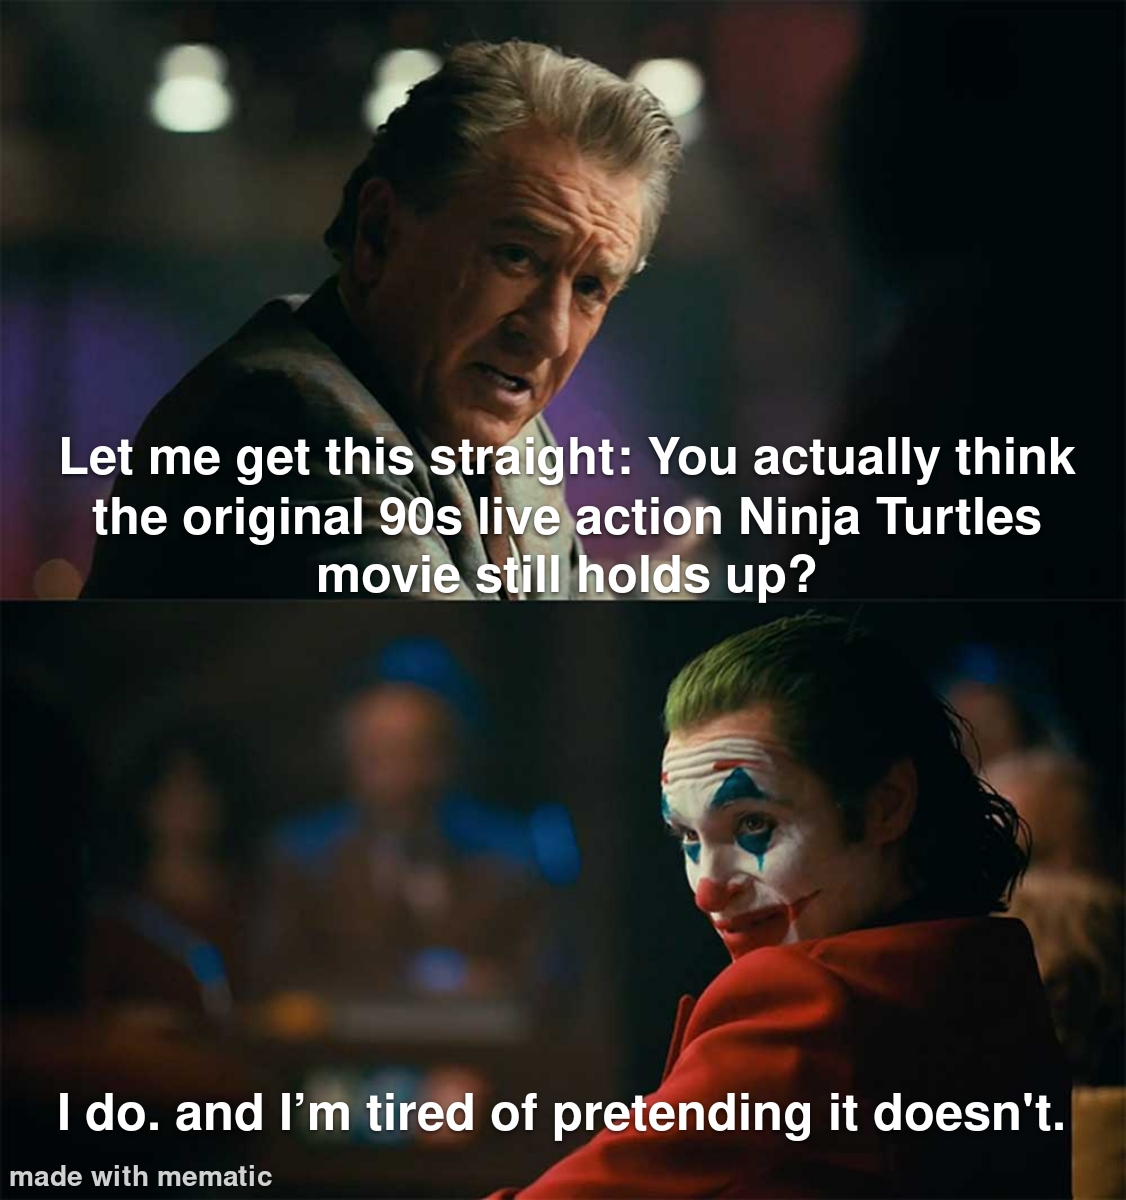 funny memes and pics  - Internet meme - Let me get this straight You actually think the original 90s live action Ninja Turtles movie still holds up? I do. and I'm tired of pretending it doesn't. made with mematic